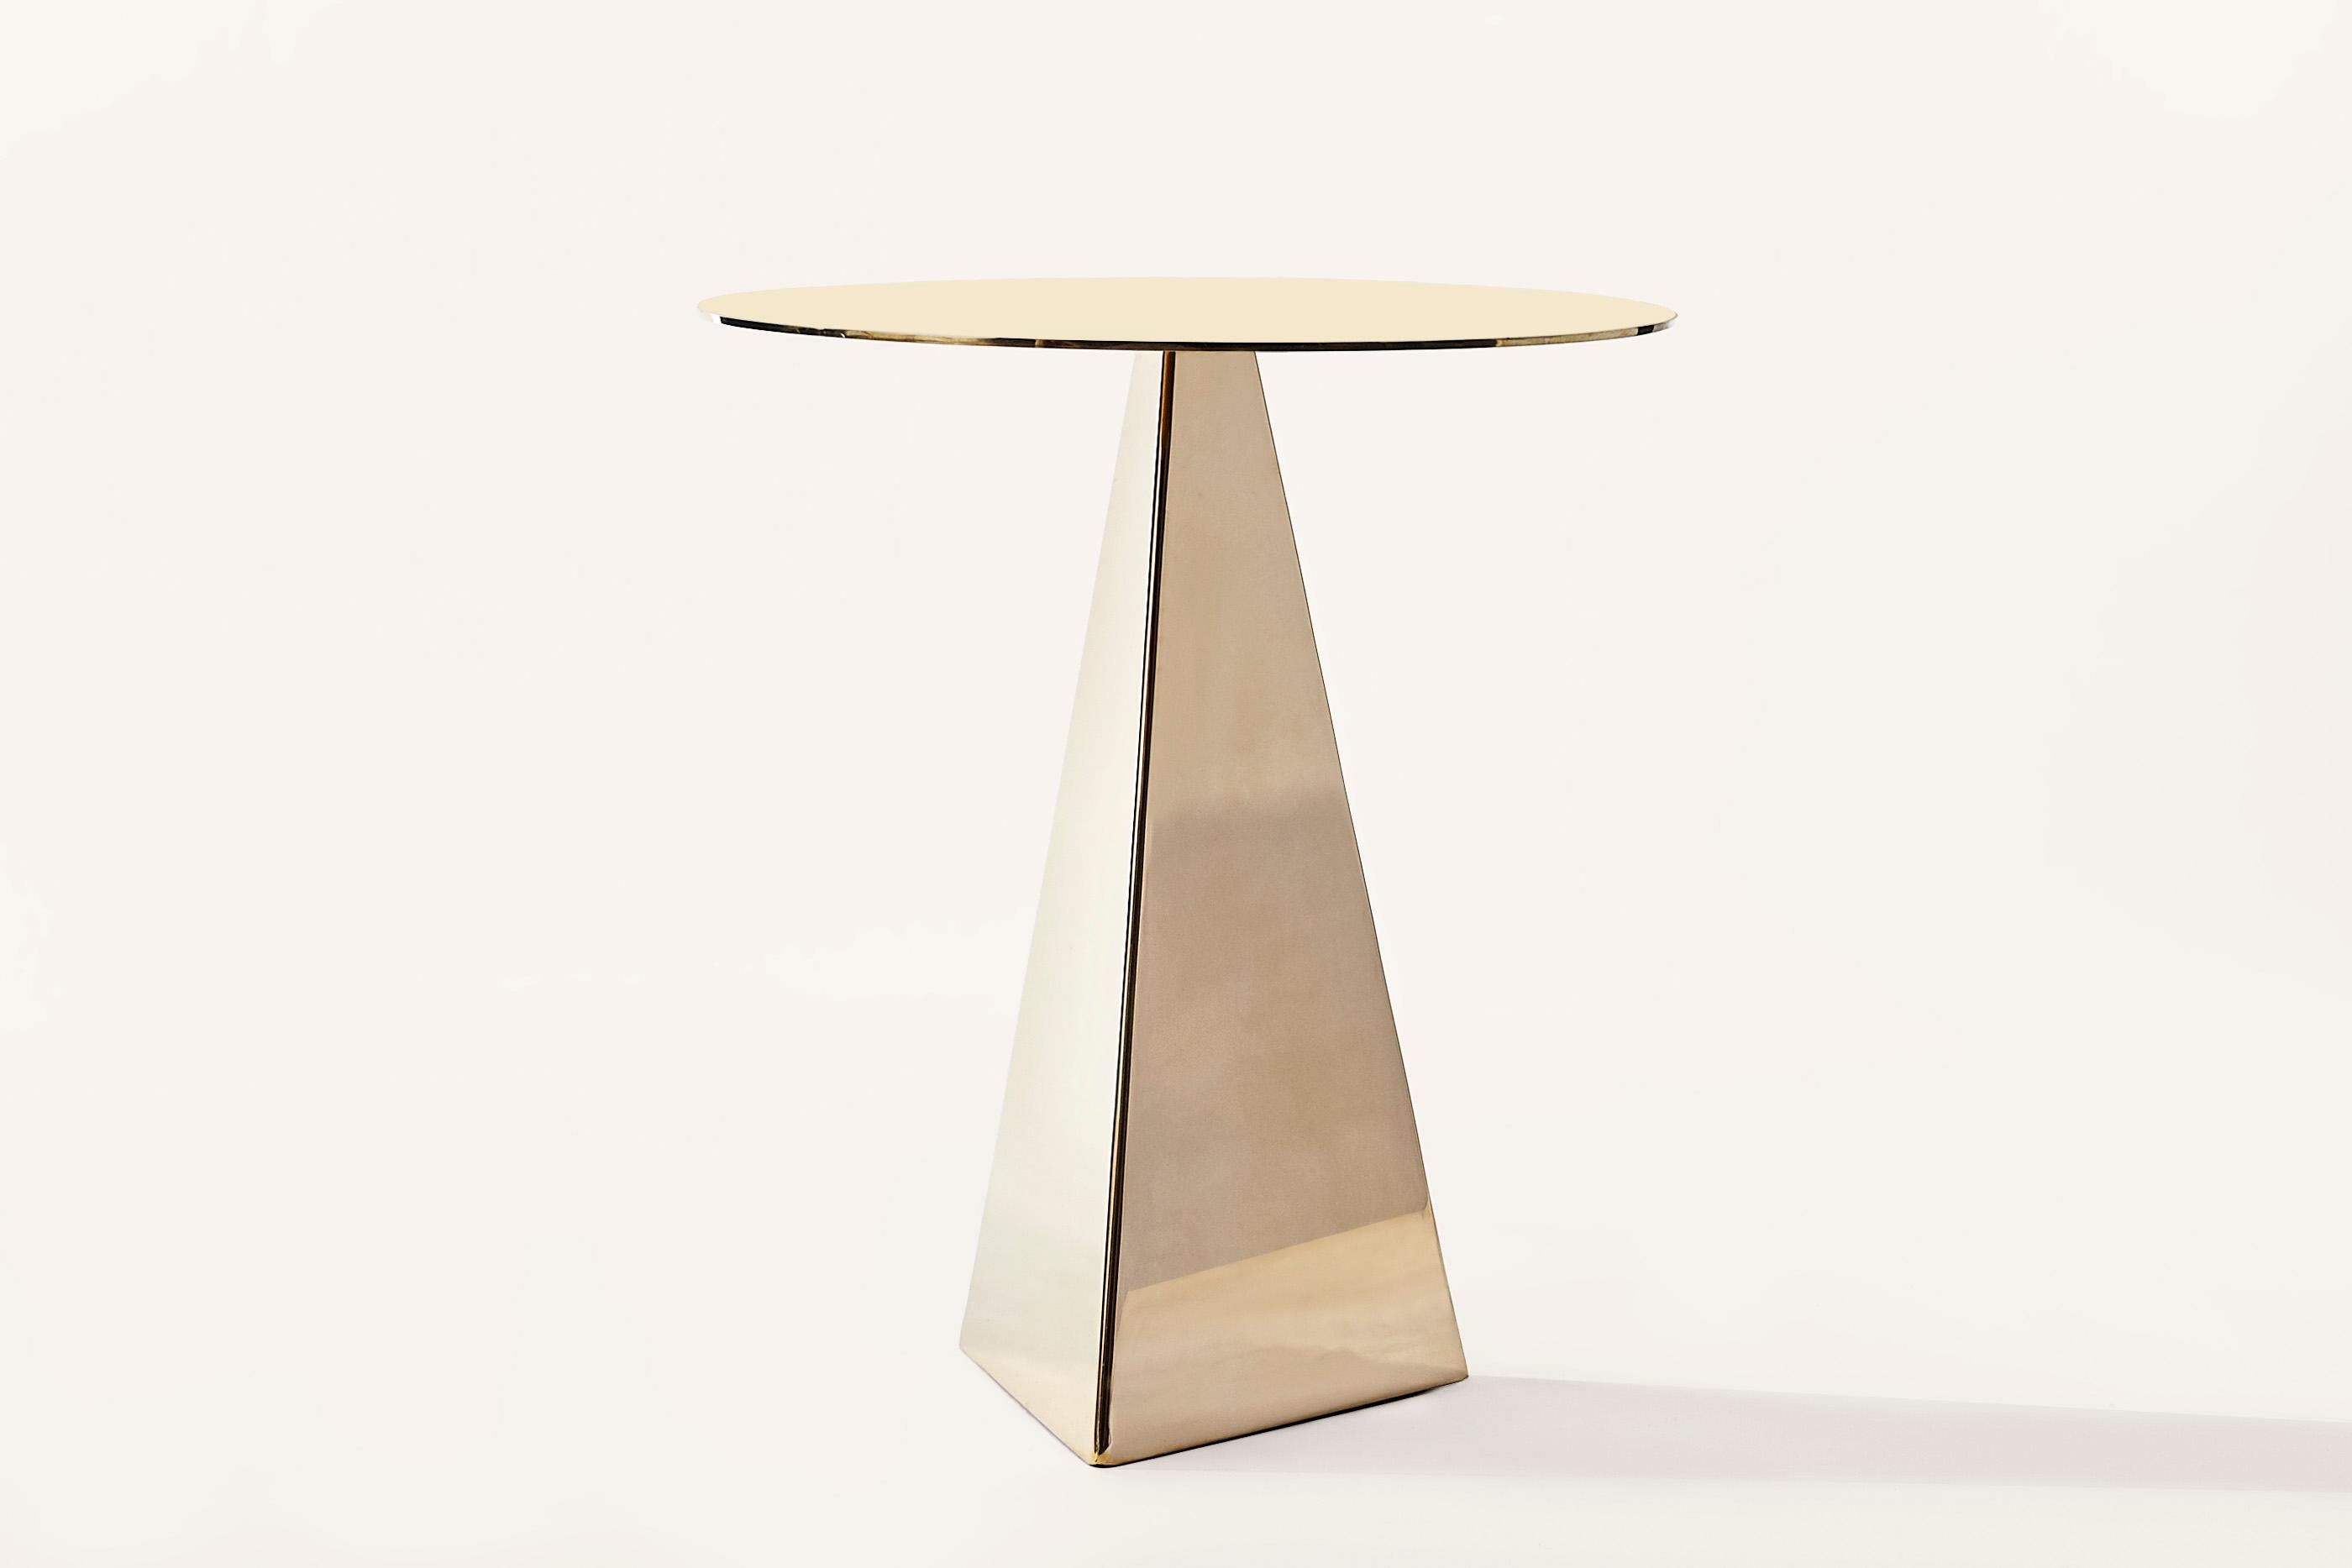 The Triangle Side Table is made from brass and is polished by hand. The high polish is left unlacquered as a live finish, in order to allow a beautiful, natural patina to develop over time.

Please inquire for custom dimensions or finishes. 

(1x)